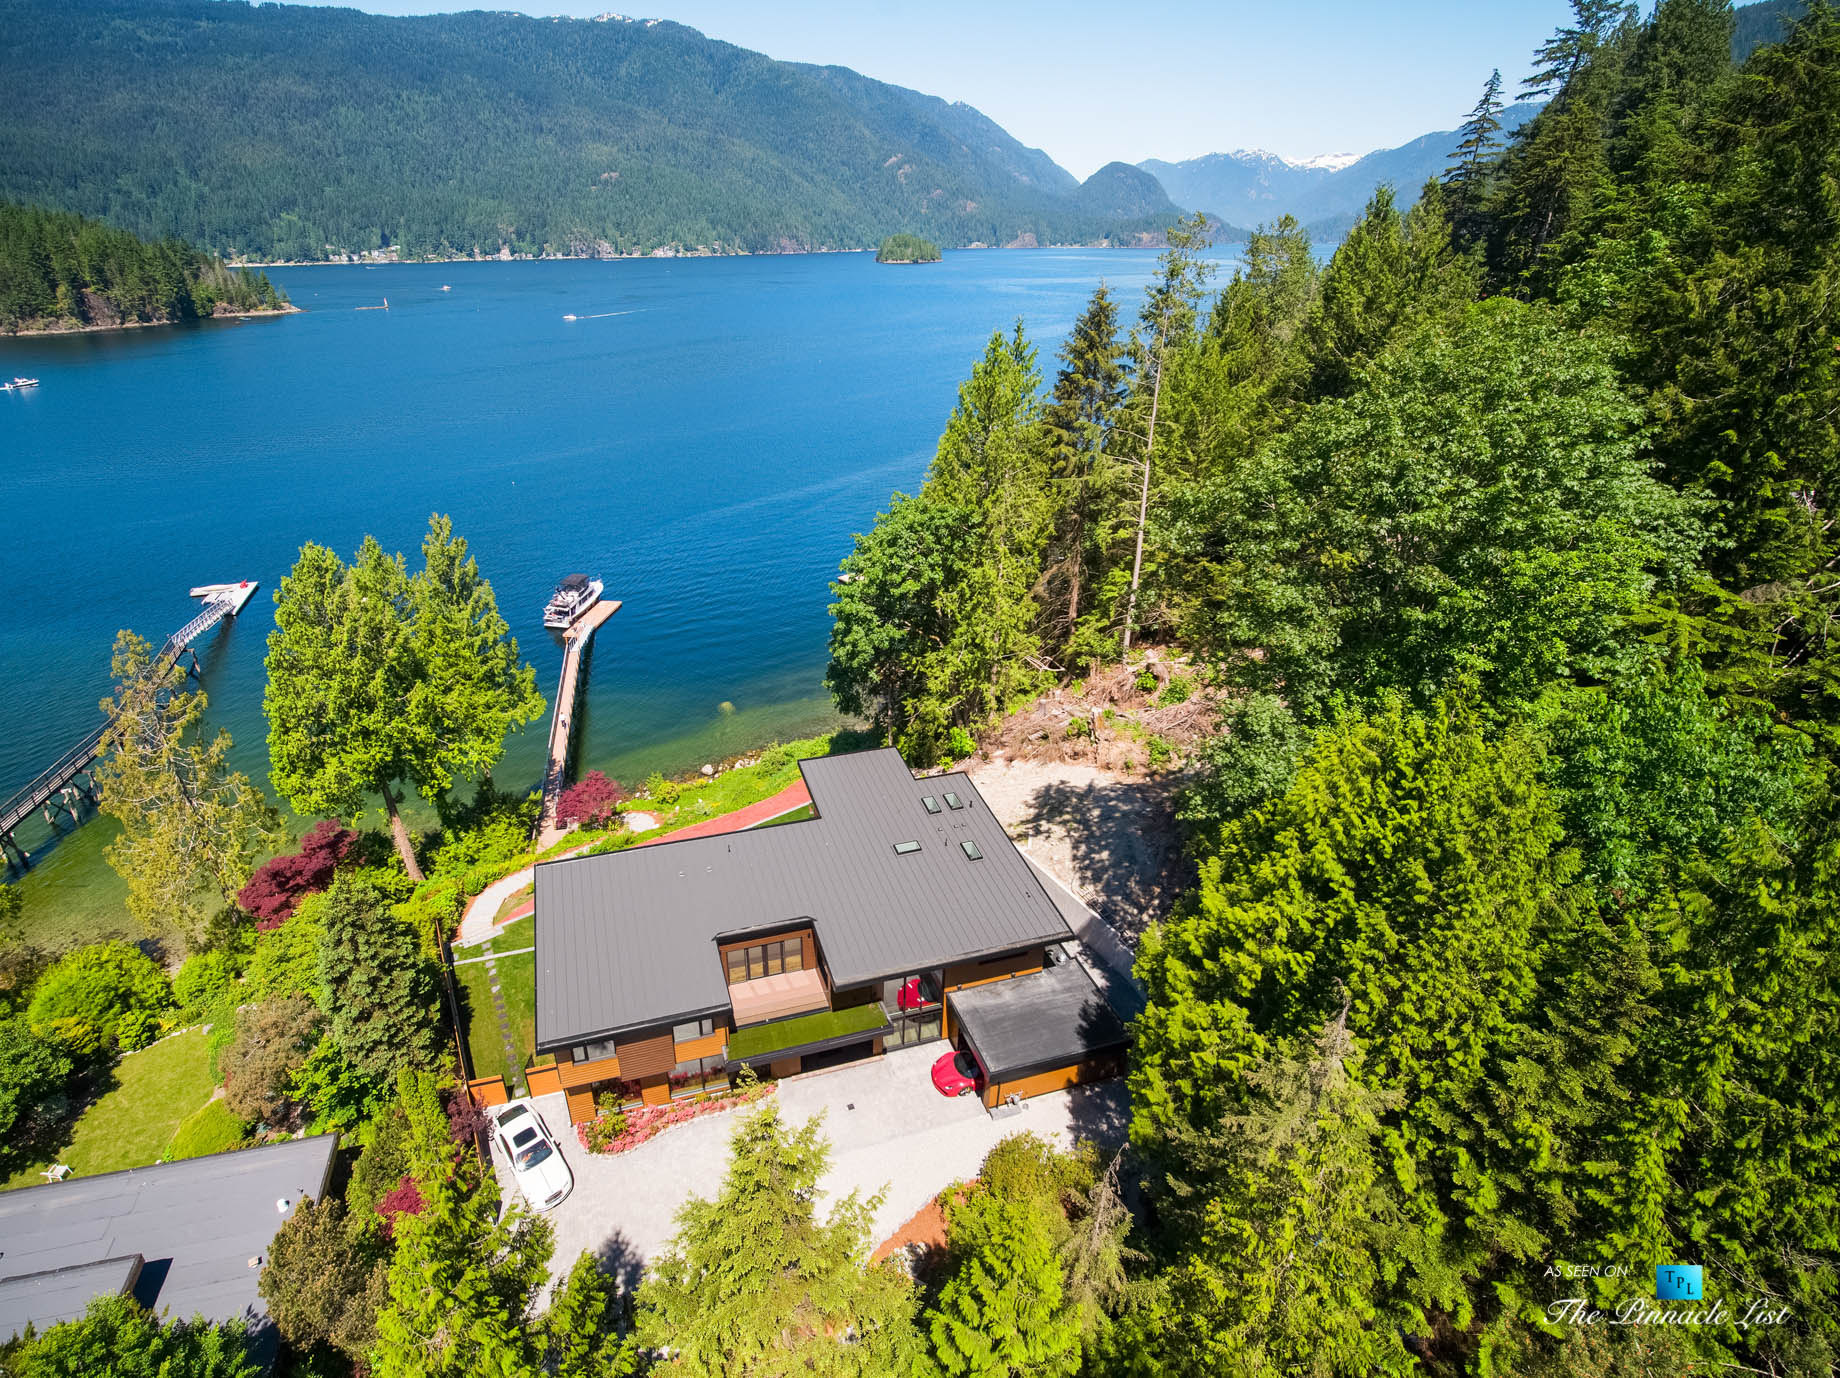 3350 Watson Rd, Belcarra, BC, Canada - Vancouver Luxury Real Estate - Modern Oceanfront Architectural Home with Red Ferrari and White Rolls-Royce Aerial View